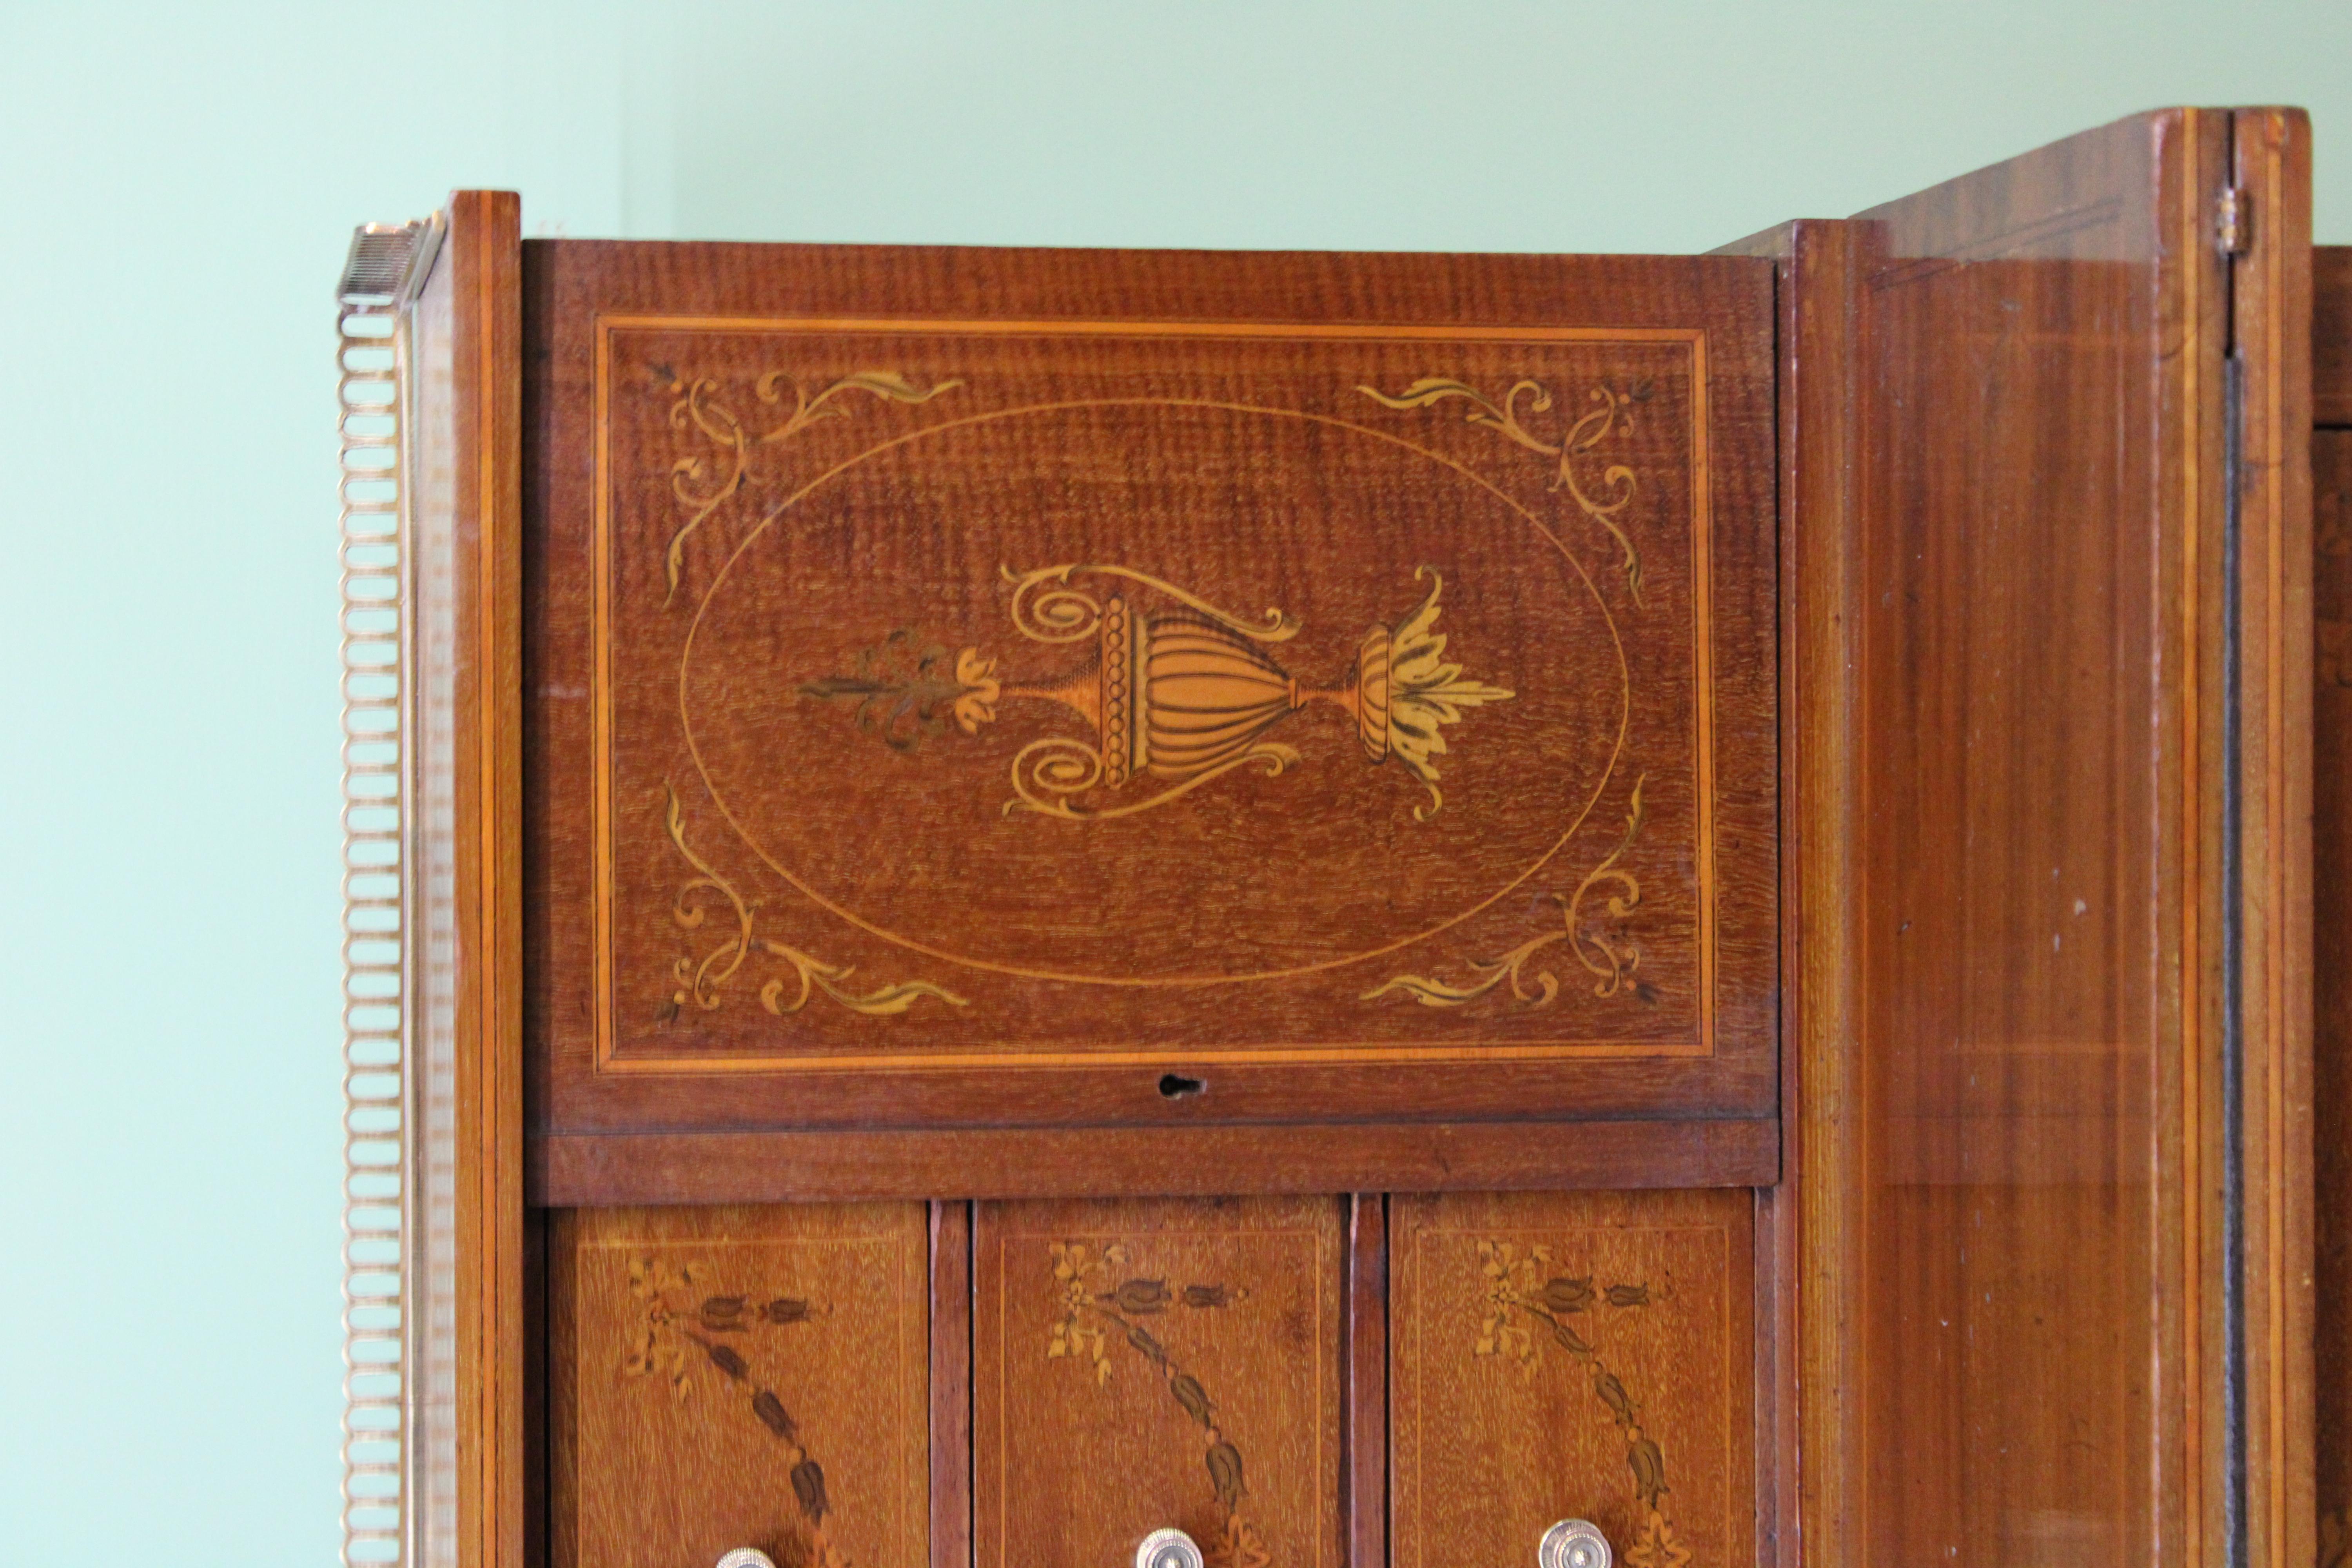 A fine quality late 19th century inlaid mahogany Bonheur du jour. Of excellent construction by the prestigious cabinet makers Jas Shoolbred & Co. Decorated with inlaid detailing of swags, urns, garlands and harebells throughout. The super-structure